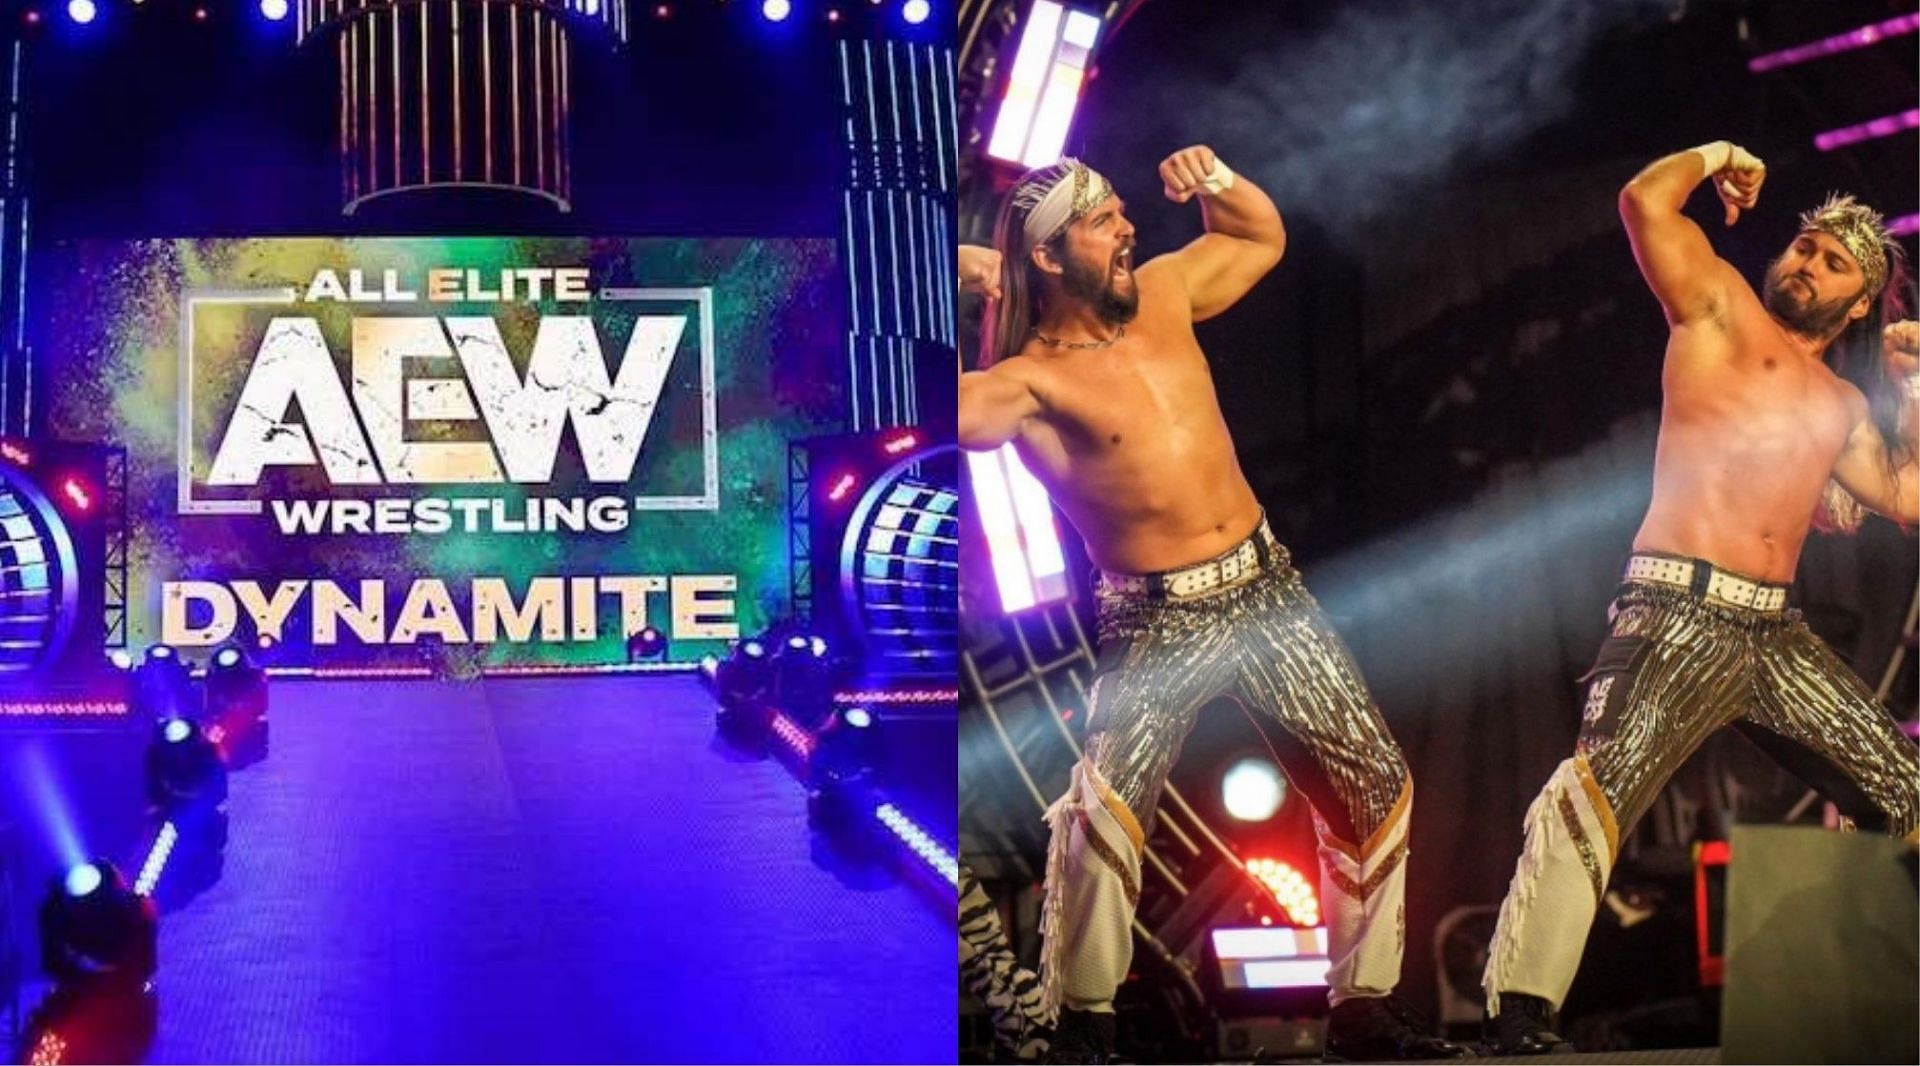 Nick and Matt Jackson are the former AEW tag team champions!